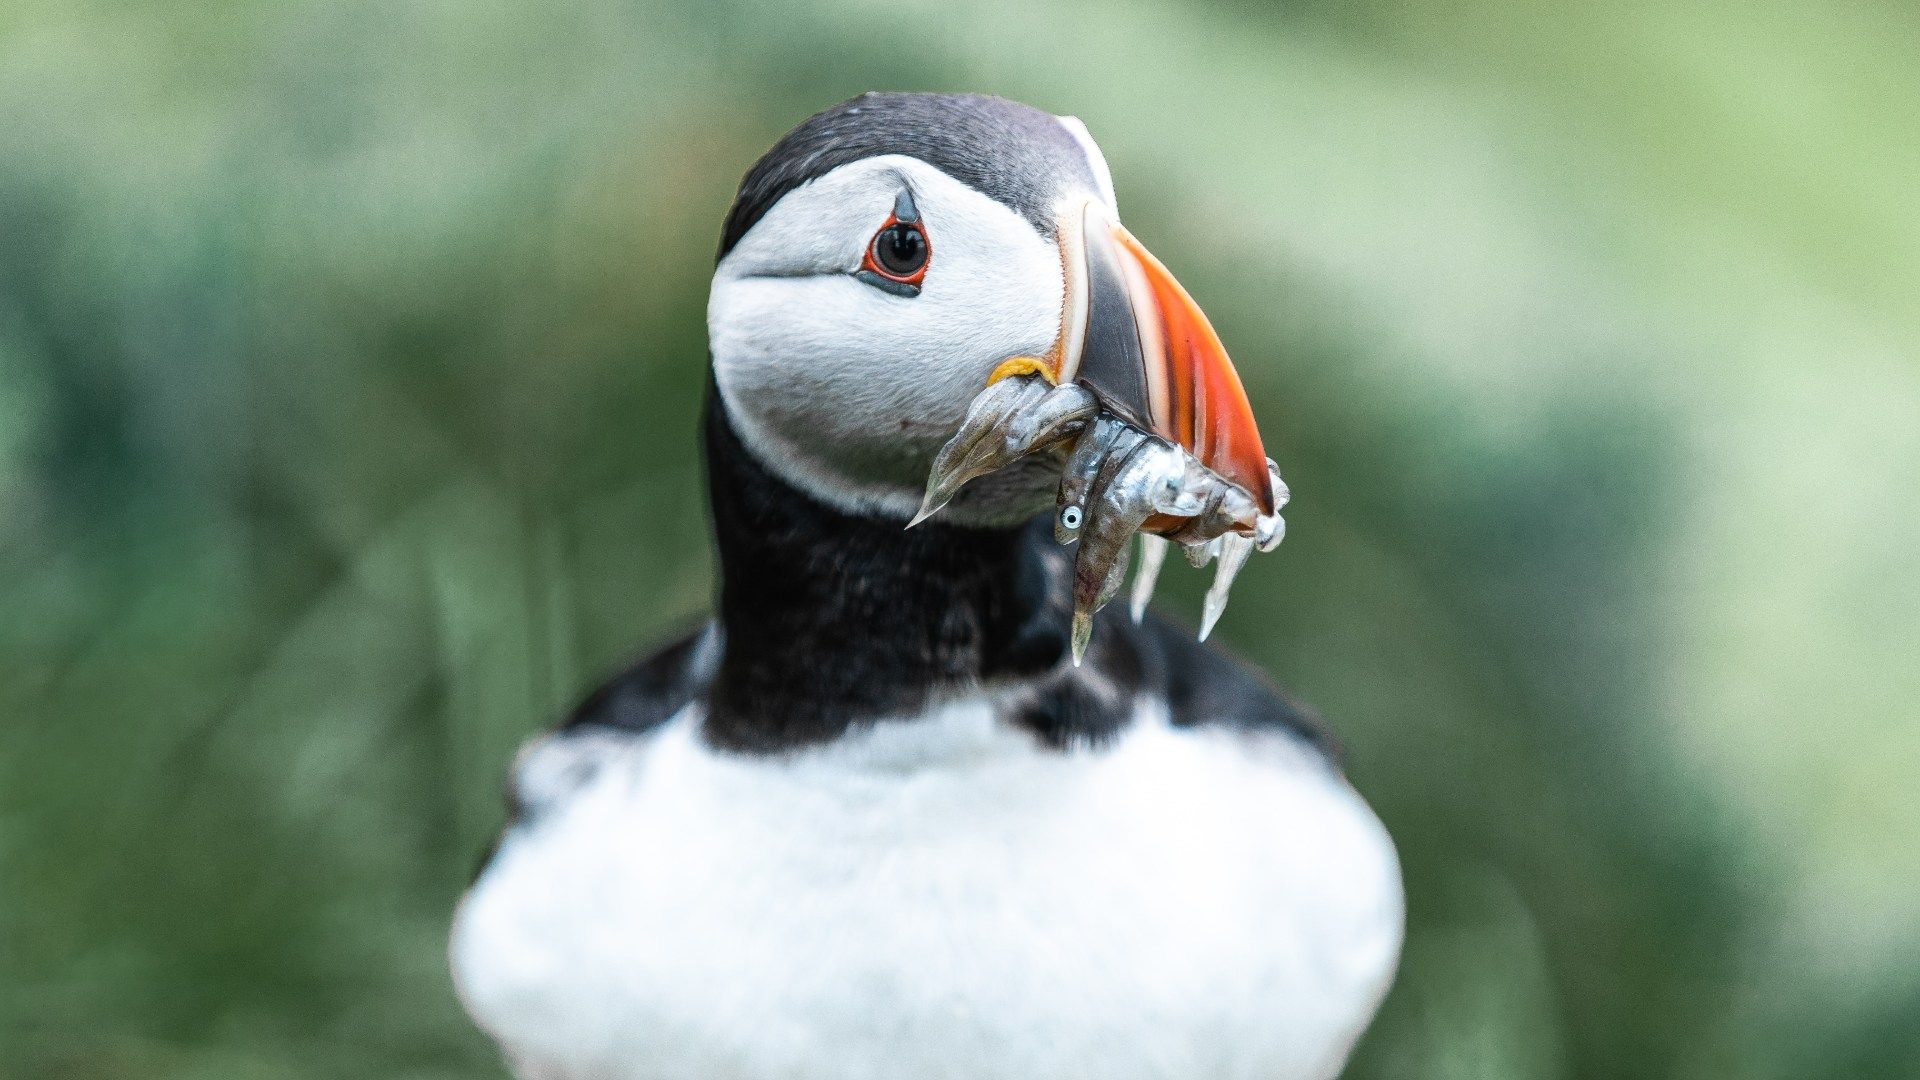 puffins arriving in iceland